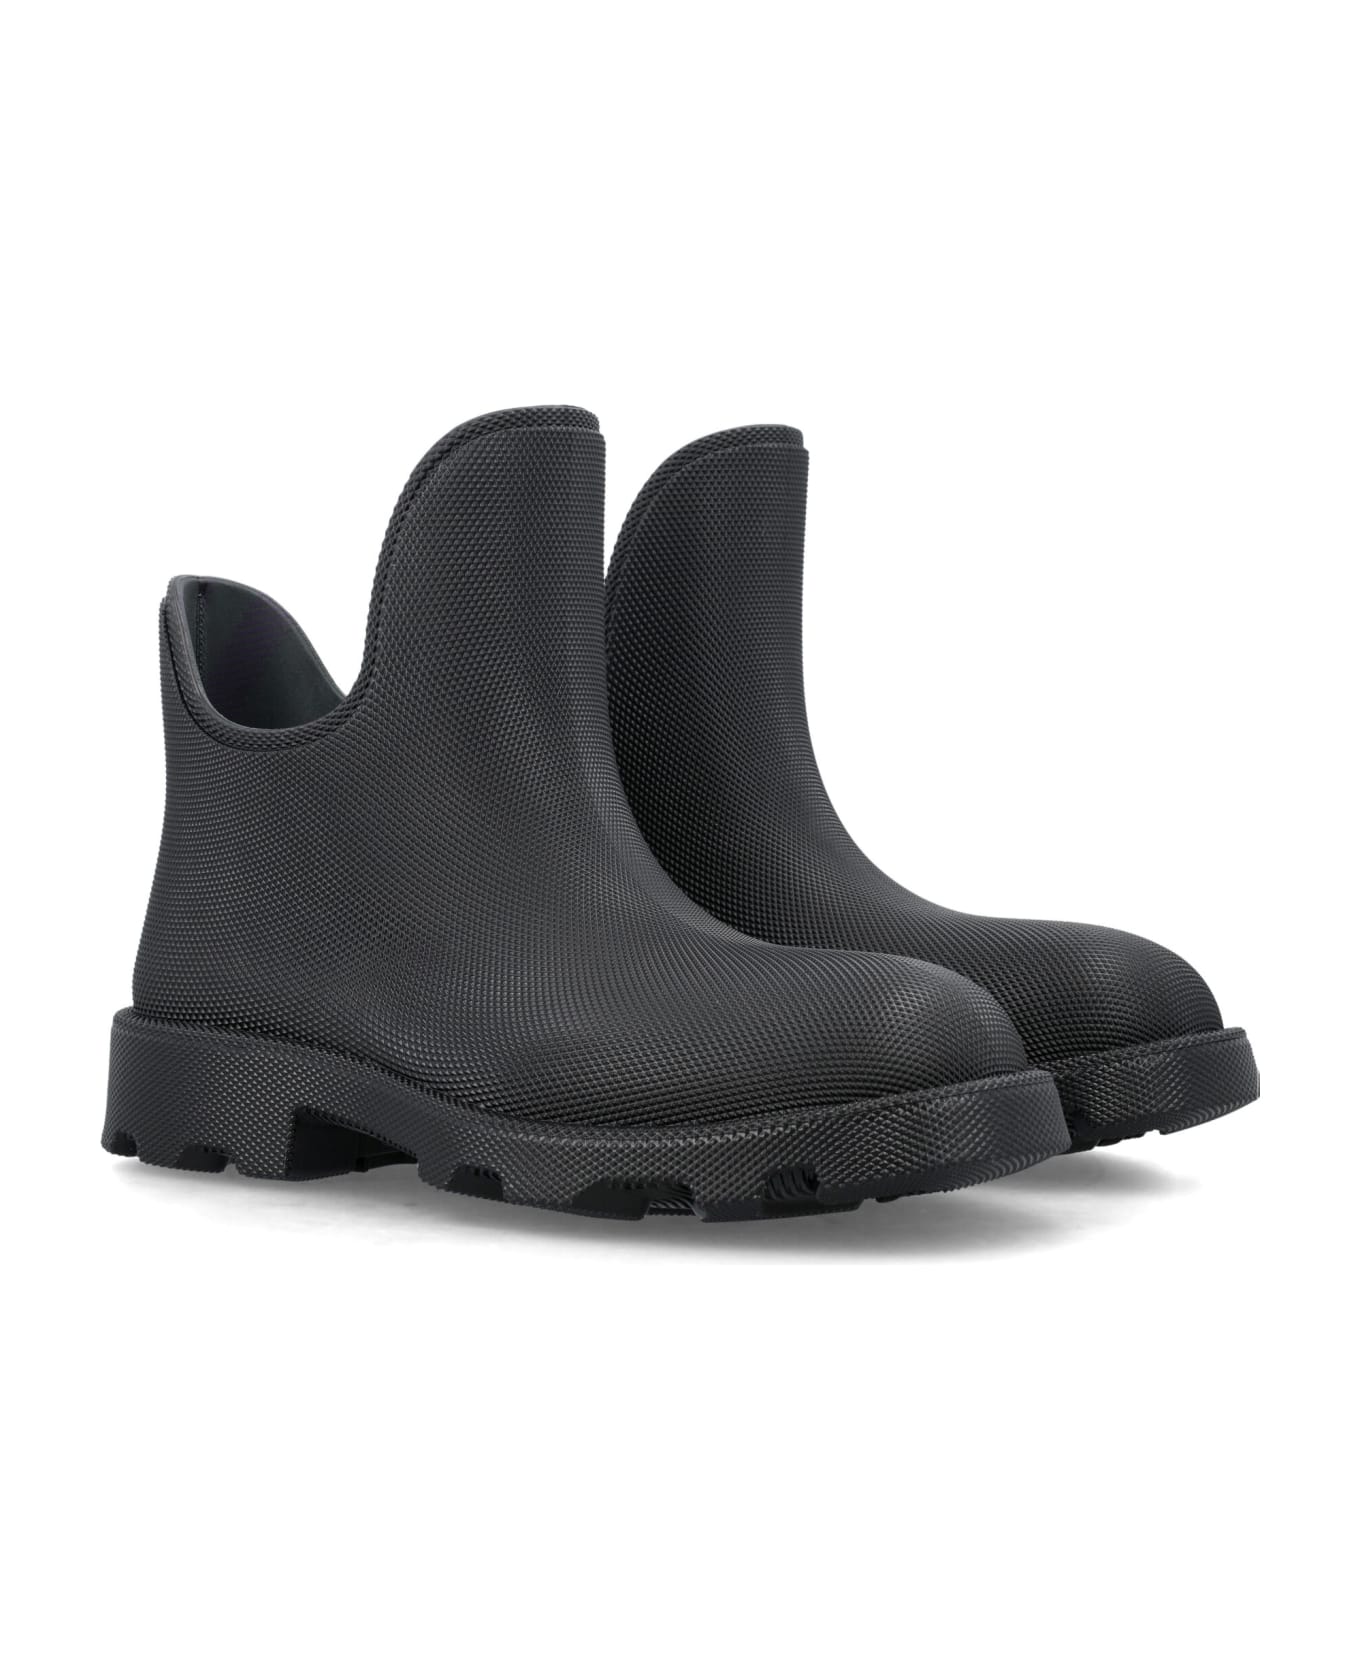 Burberry London Mf Ray Ankle Boots - BLACK ブーツ